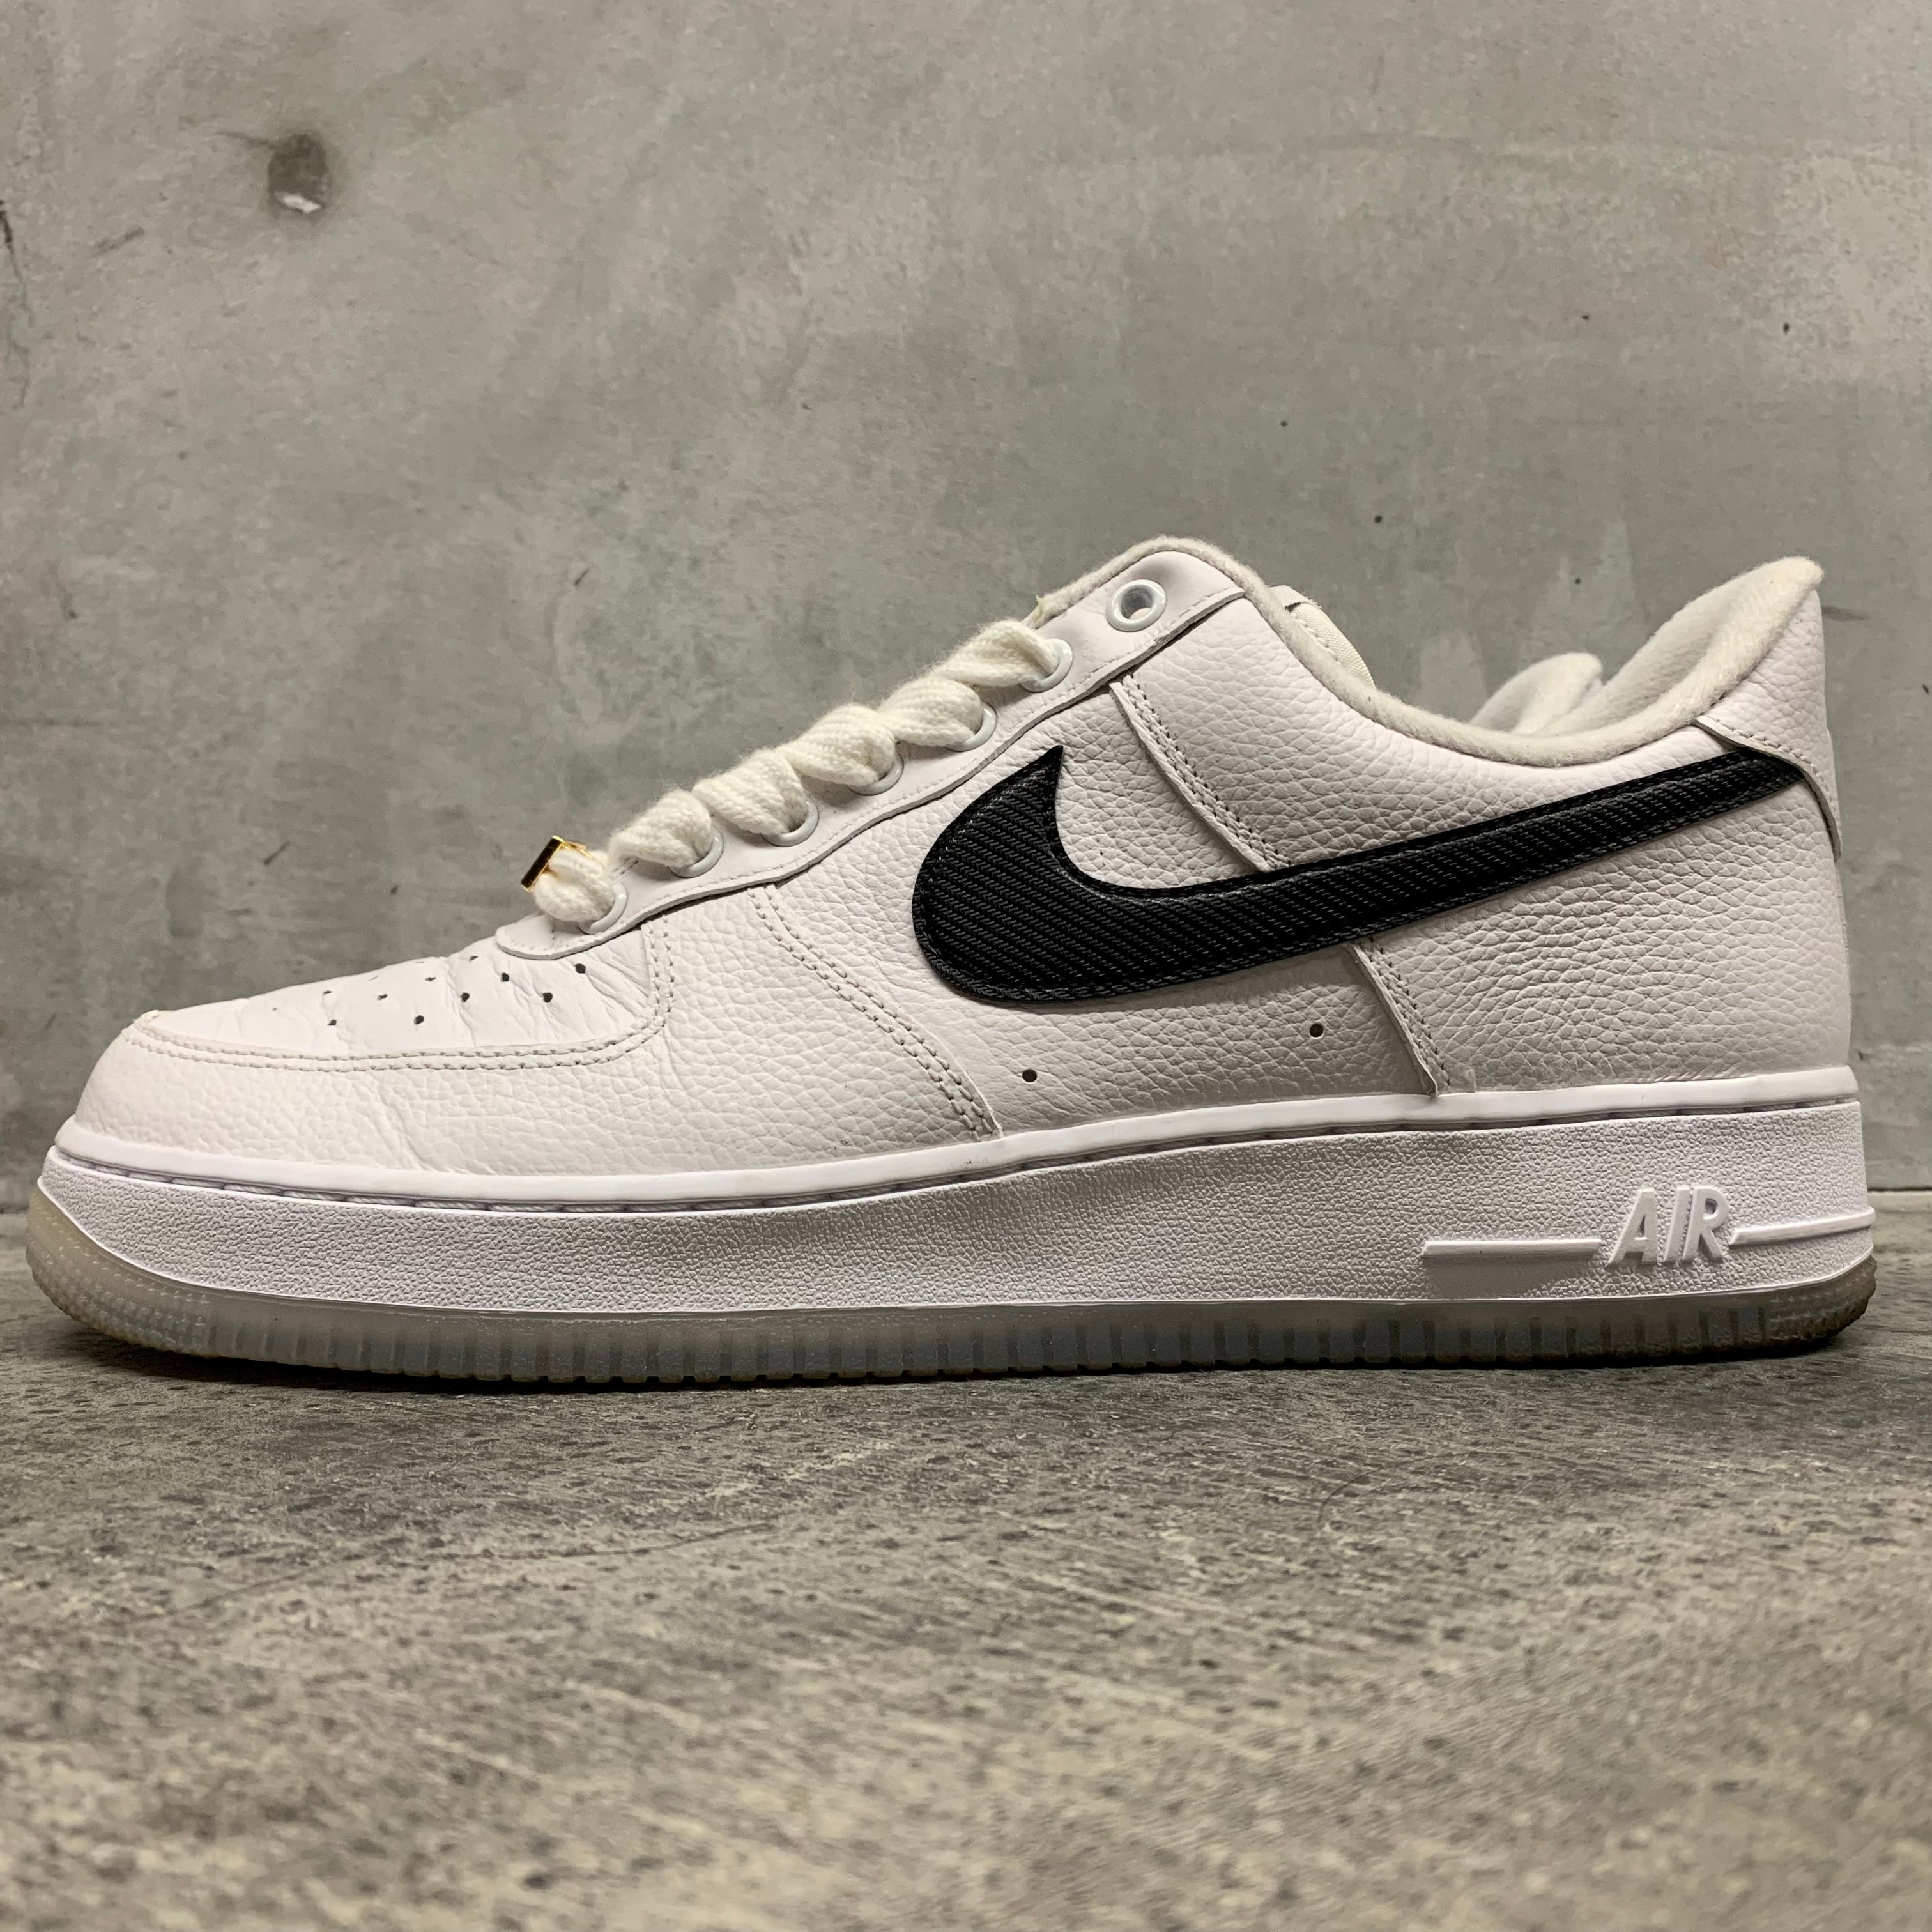 Nike Air Force 1 Low HTM Paul Brown | Size 10